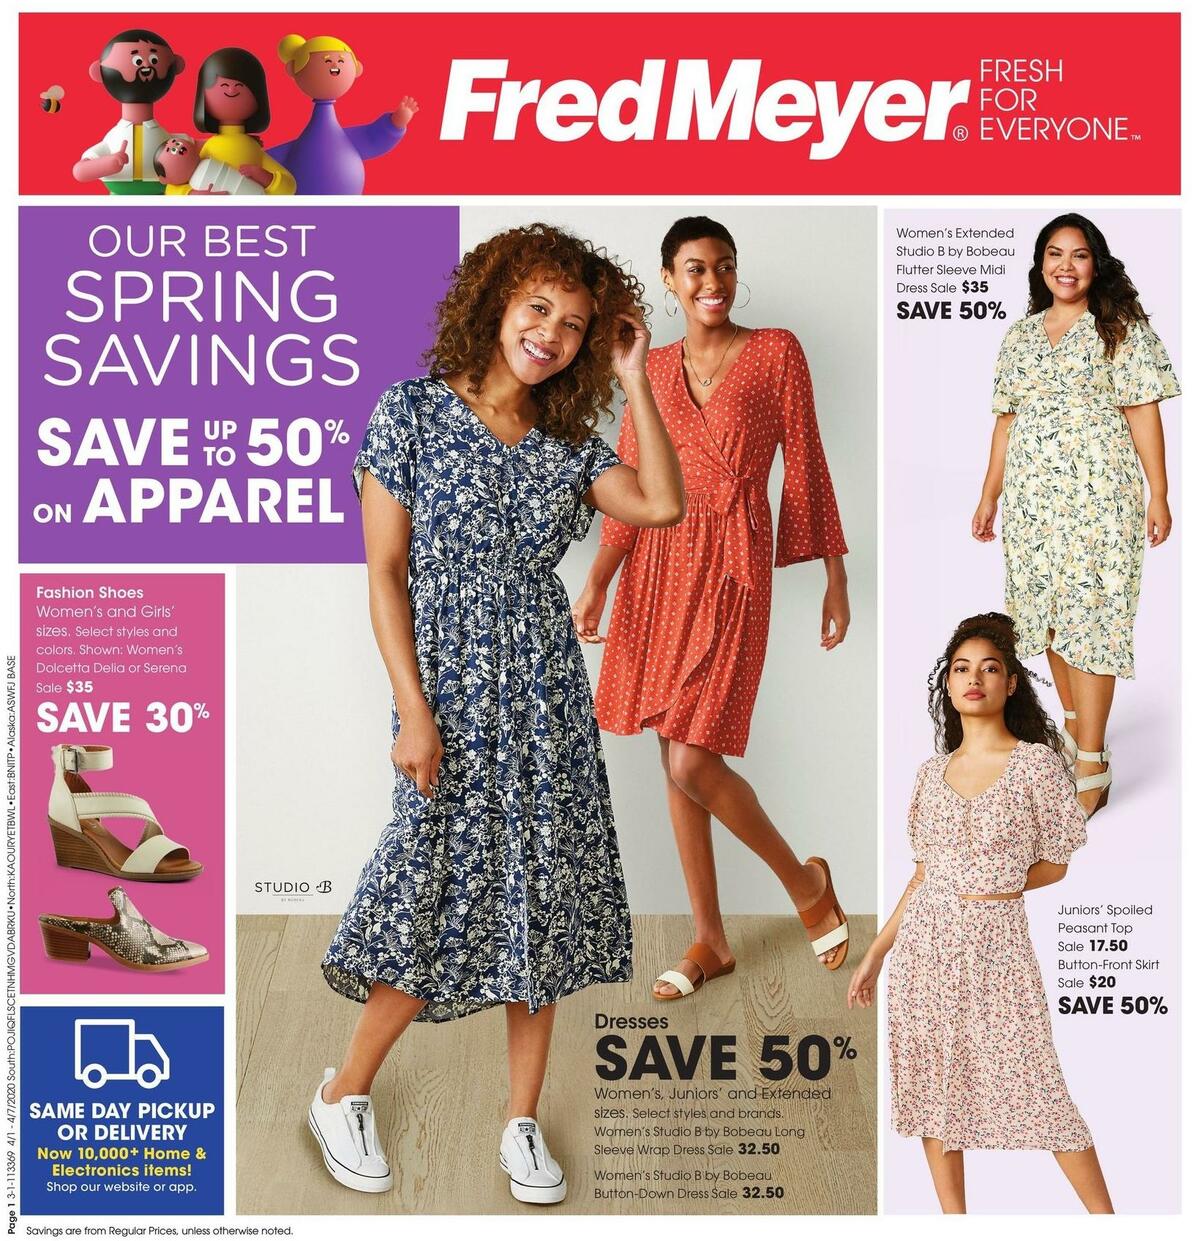 Fred Meyer Apparel Weekly Ad & Specials from April 1